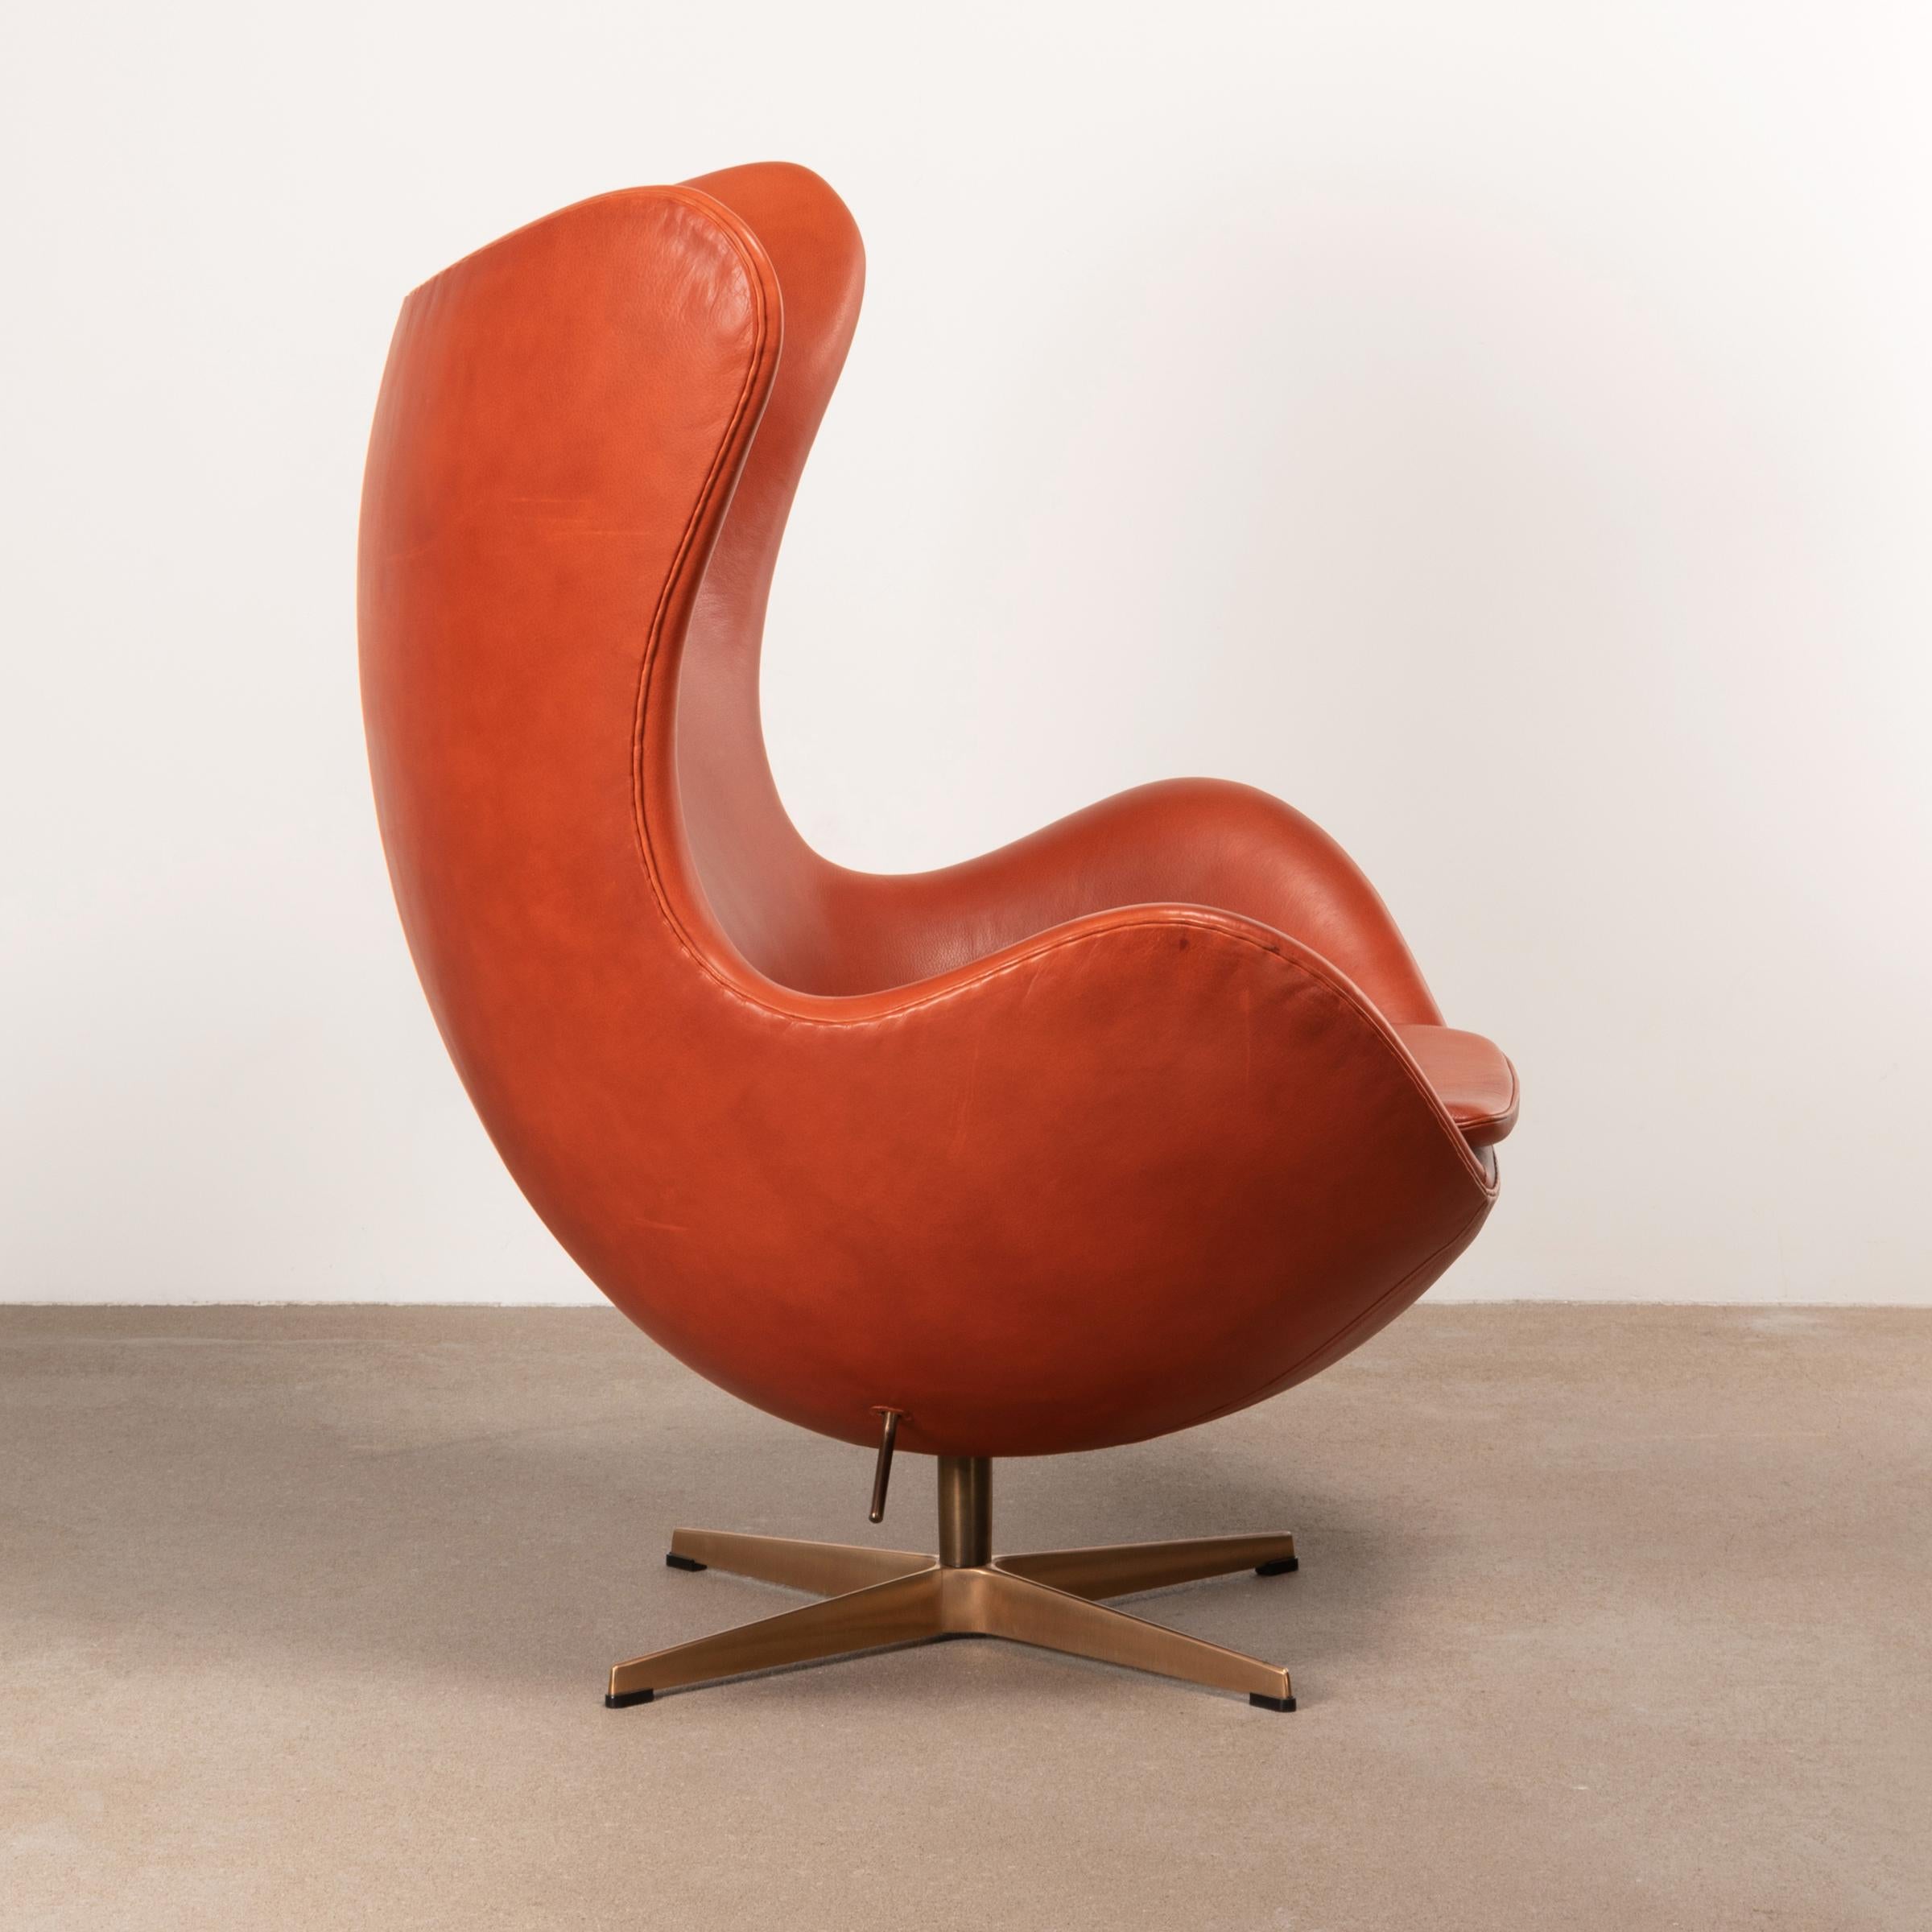 Cast Arne Jacobsen Egg Chair in Light Patined Grace Leather by Fitz Hansen